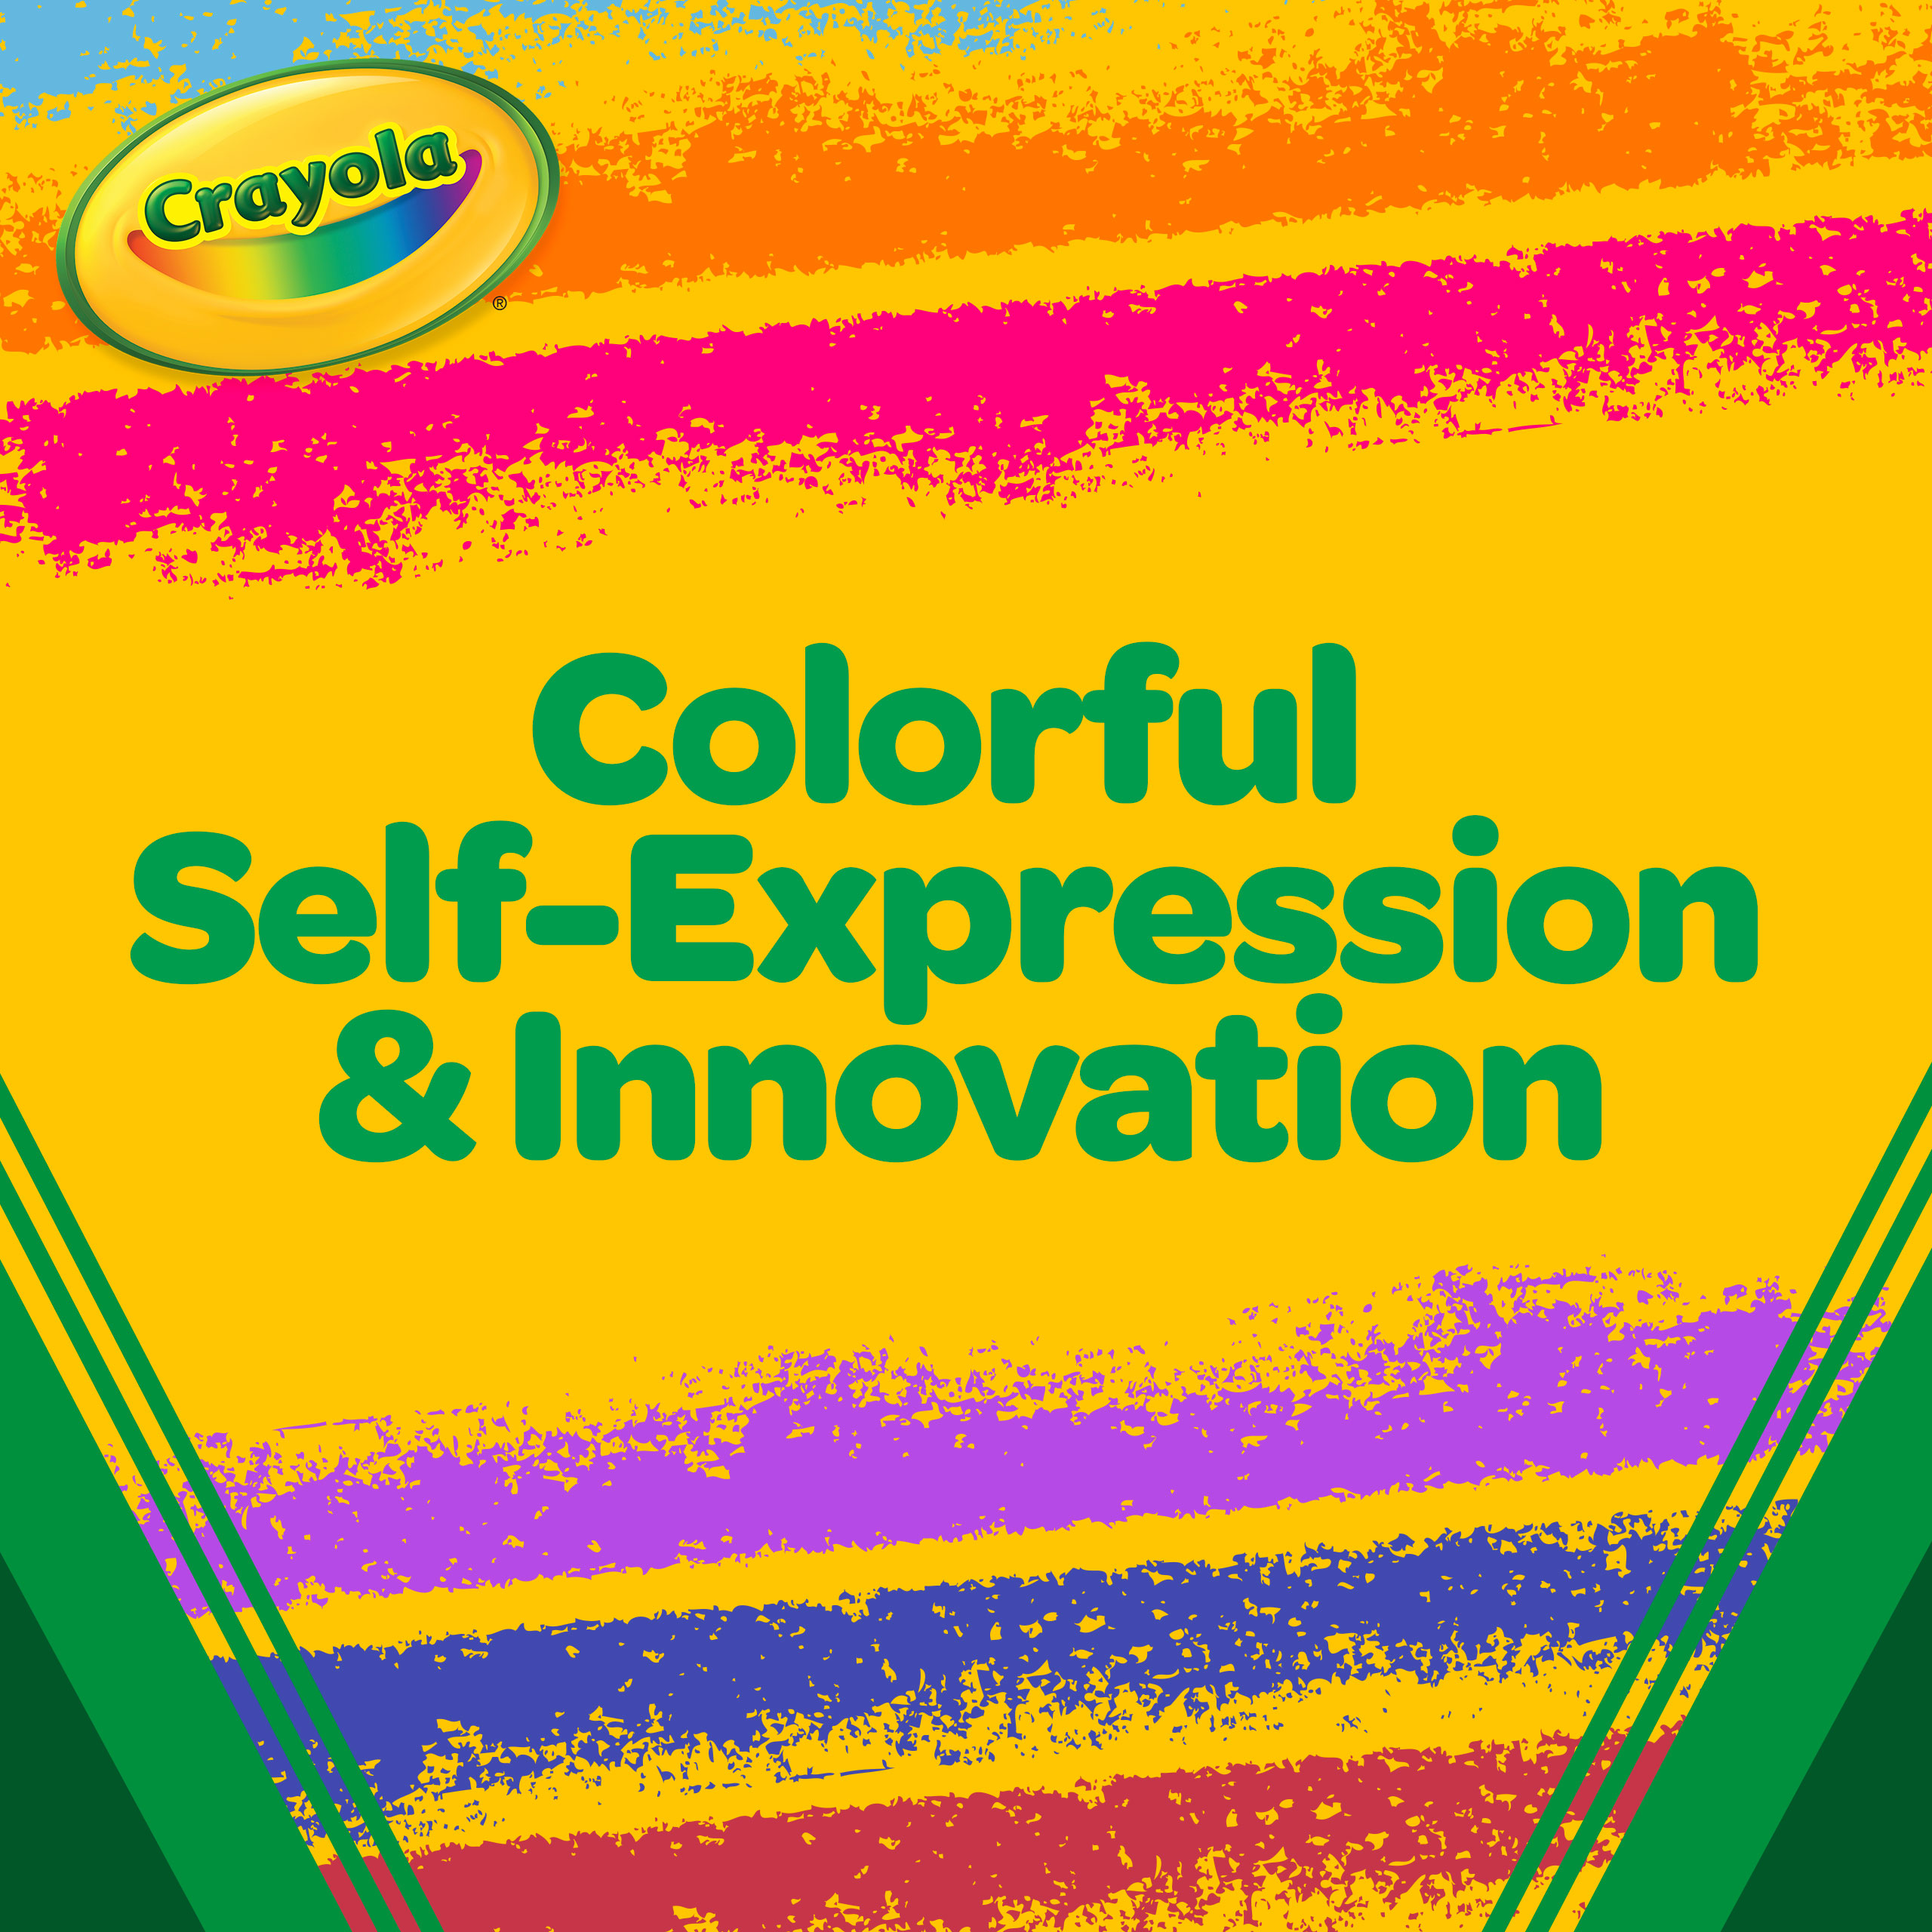 Crayola Construction Colored Paper in 10 Colors, School Supplies for Kindergarten, 120 Pcs, Child - image 7 of 11